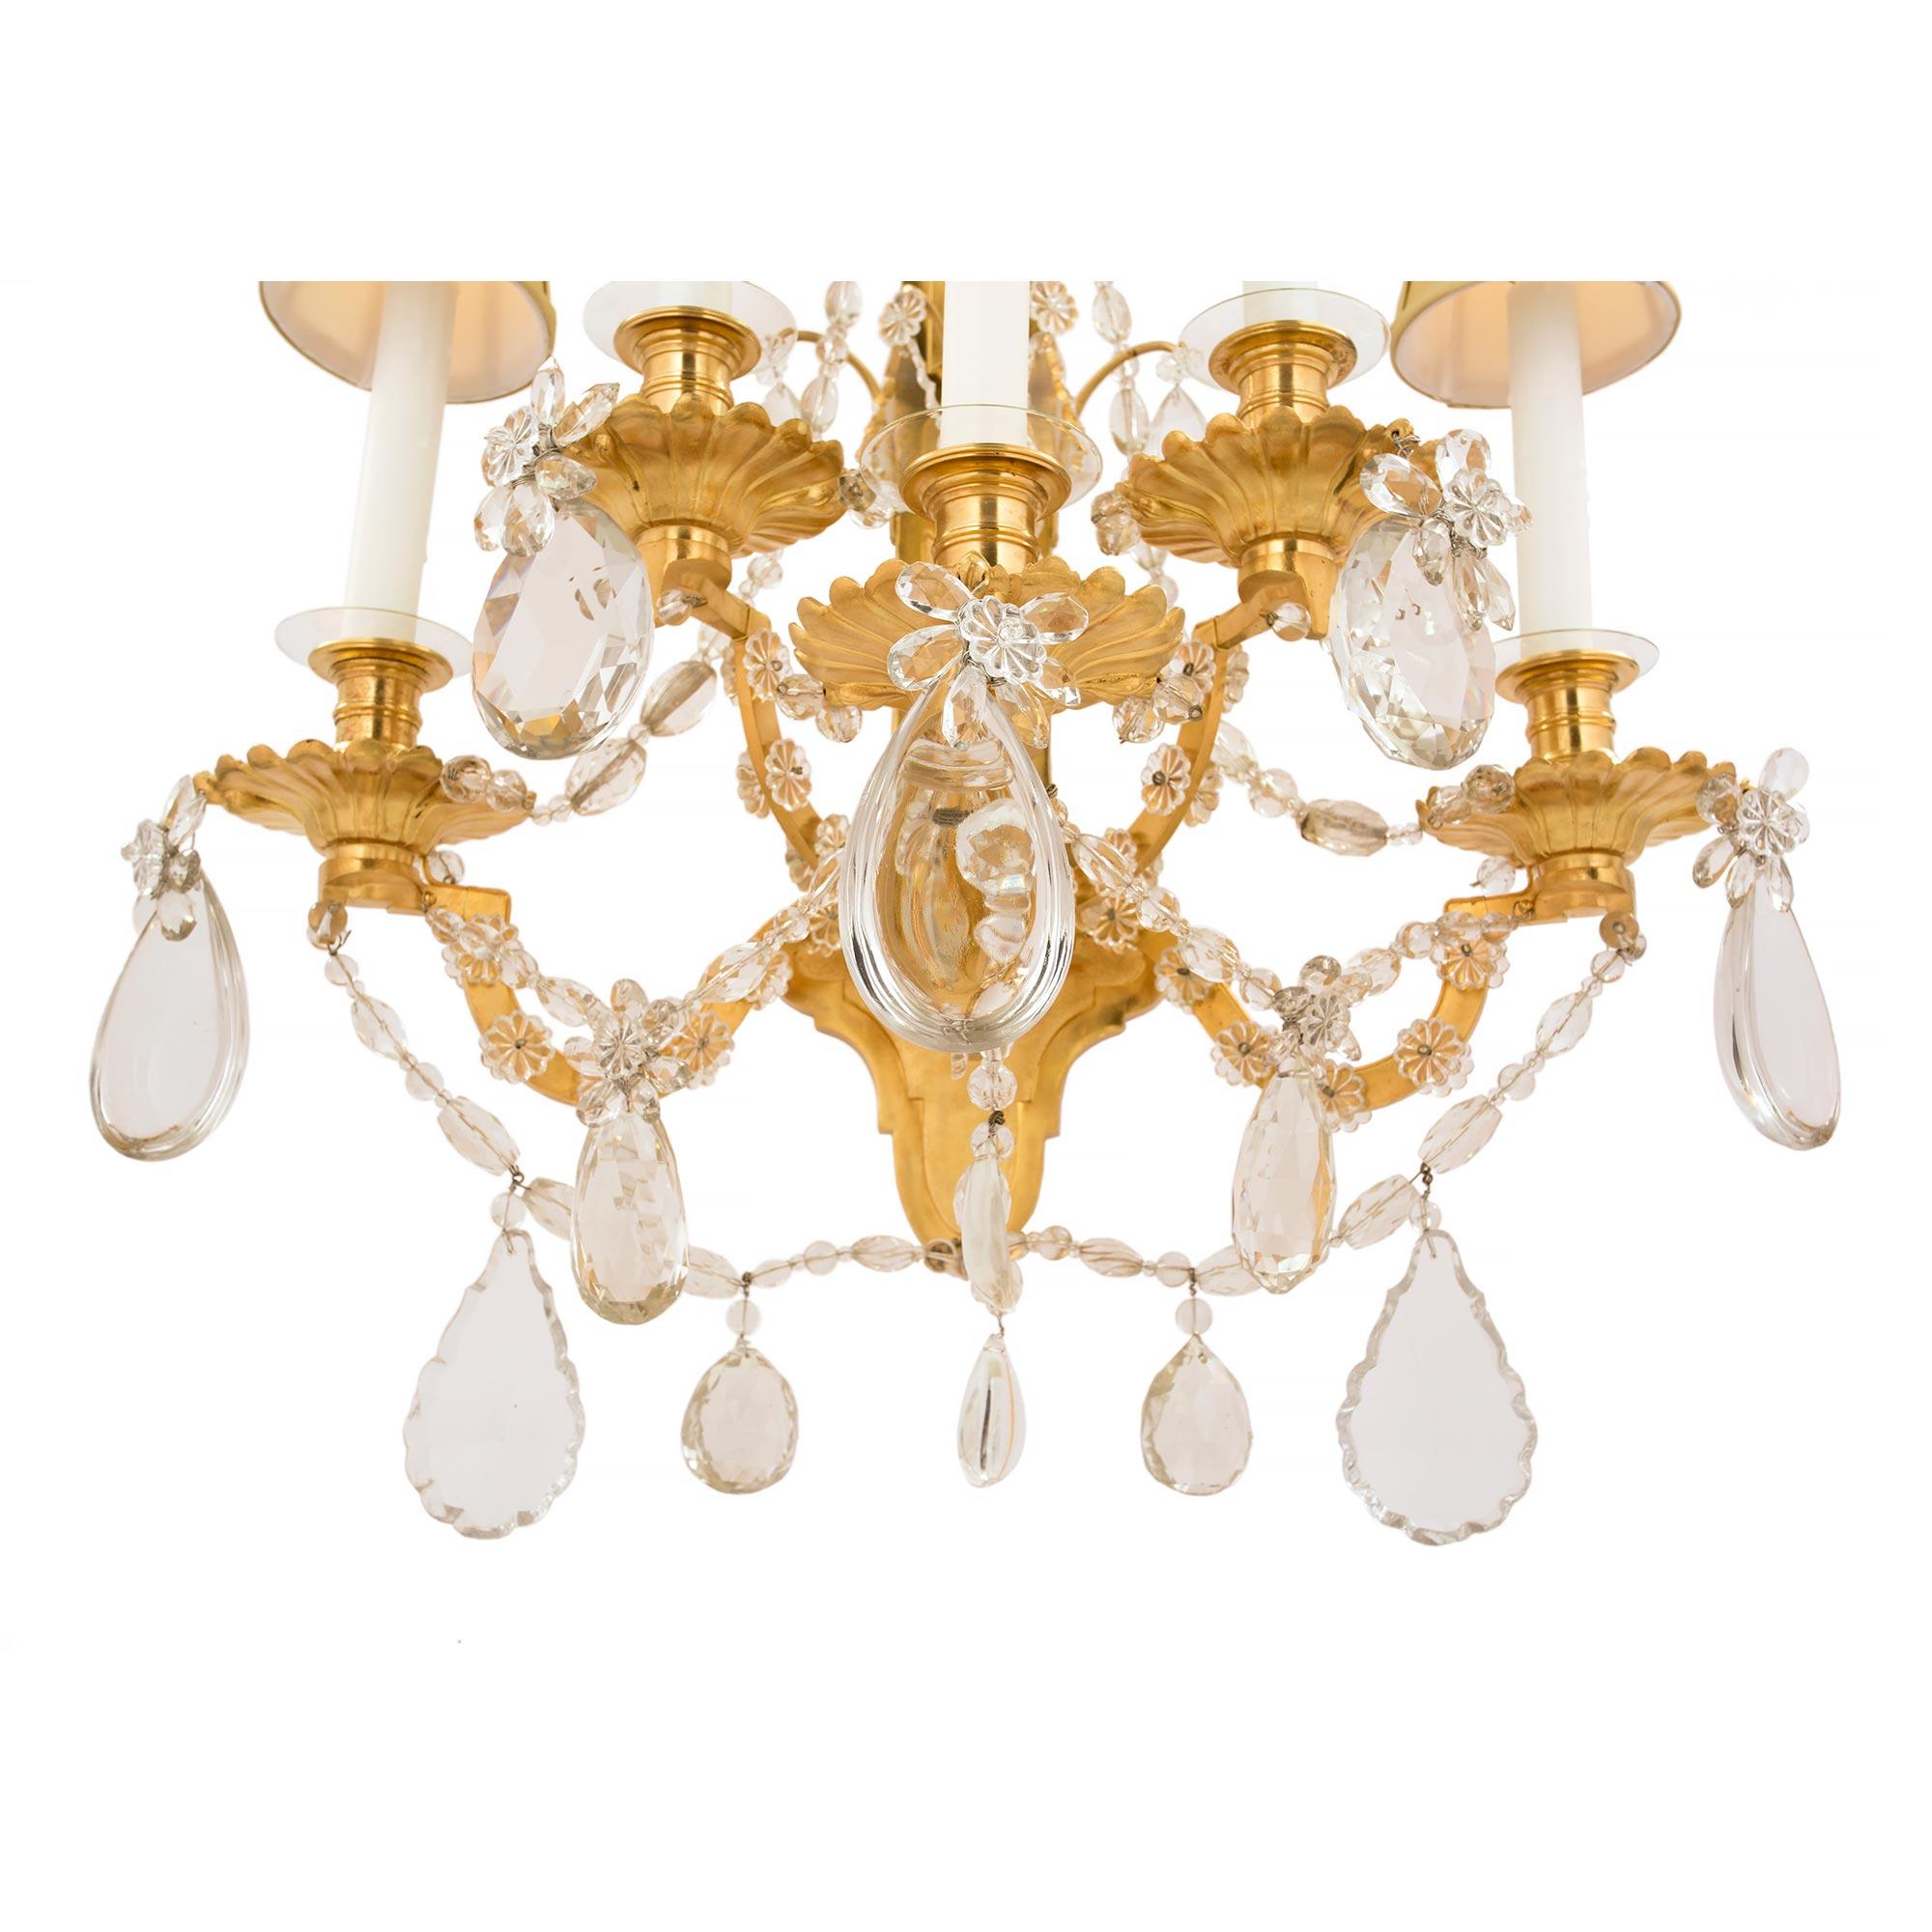  Pair of French 19th Century Louis XVI St. Ormolu and Baccarat Crystal Sconces For Sale 4